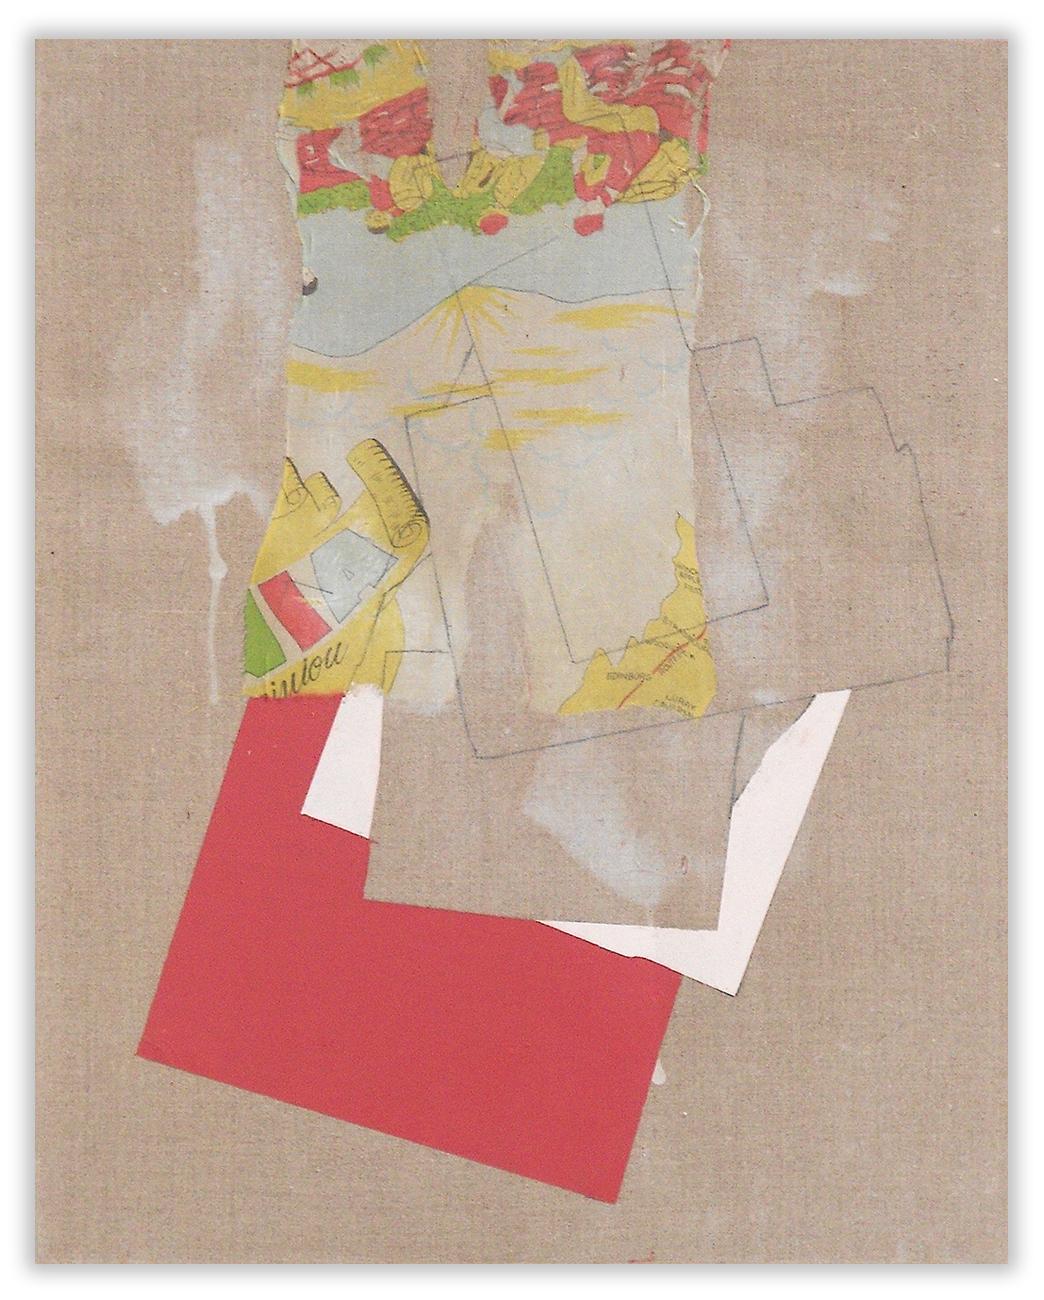 IA (Abstract Painting)
Oil, fabric, pencil on linen — Unframed.

Feinberg works with a variety of techniques and mediums, including painting, paper collage and installation.
Her process results in abstract paintings, her work defies objective